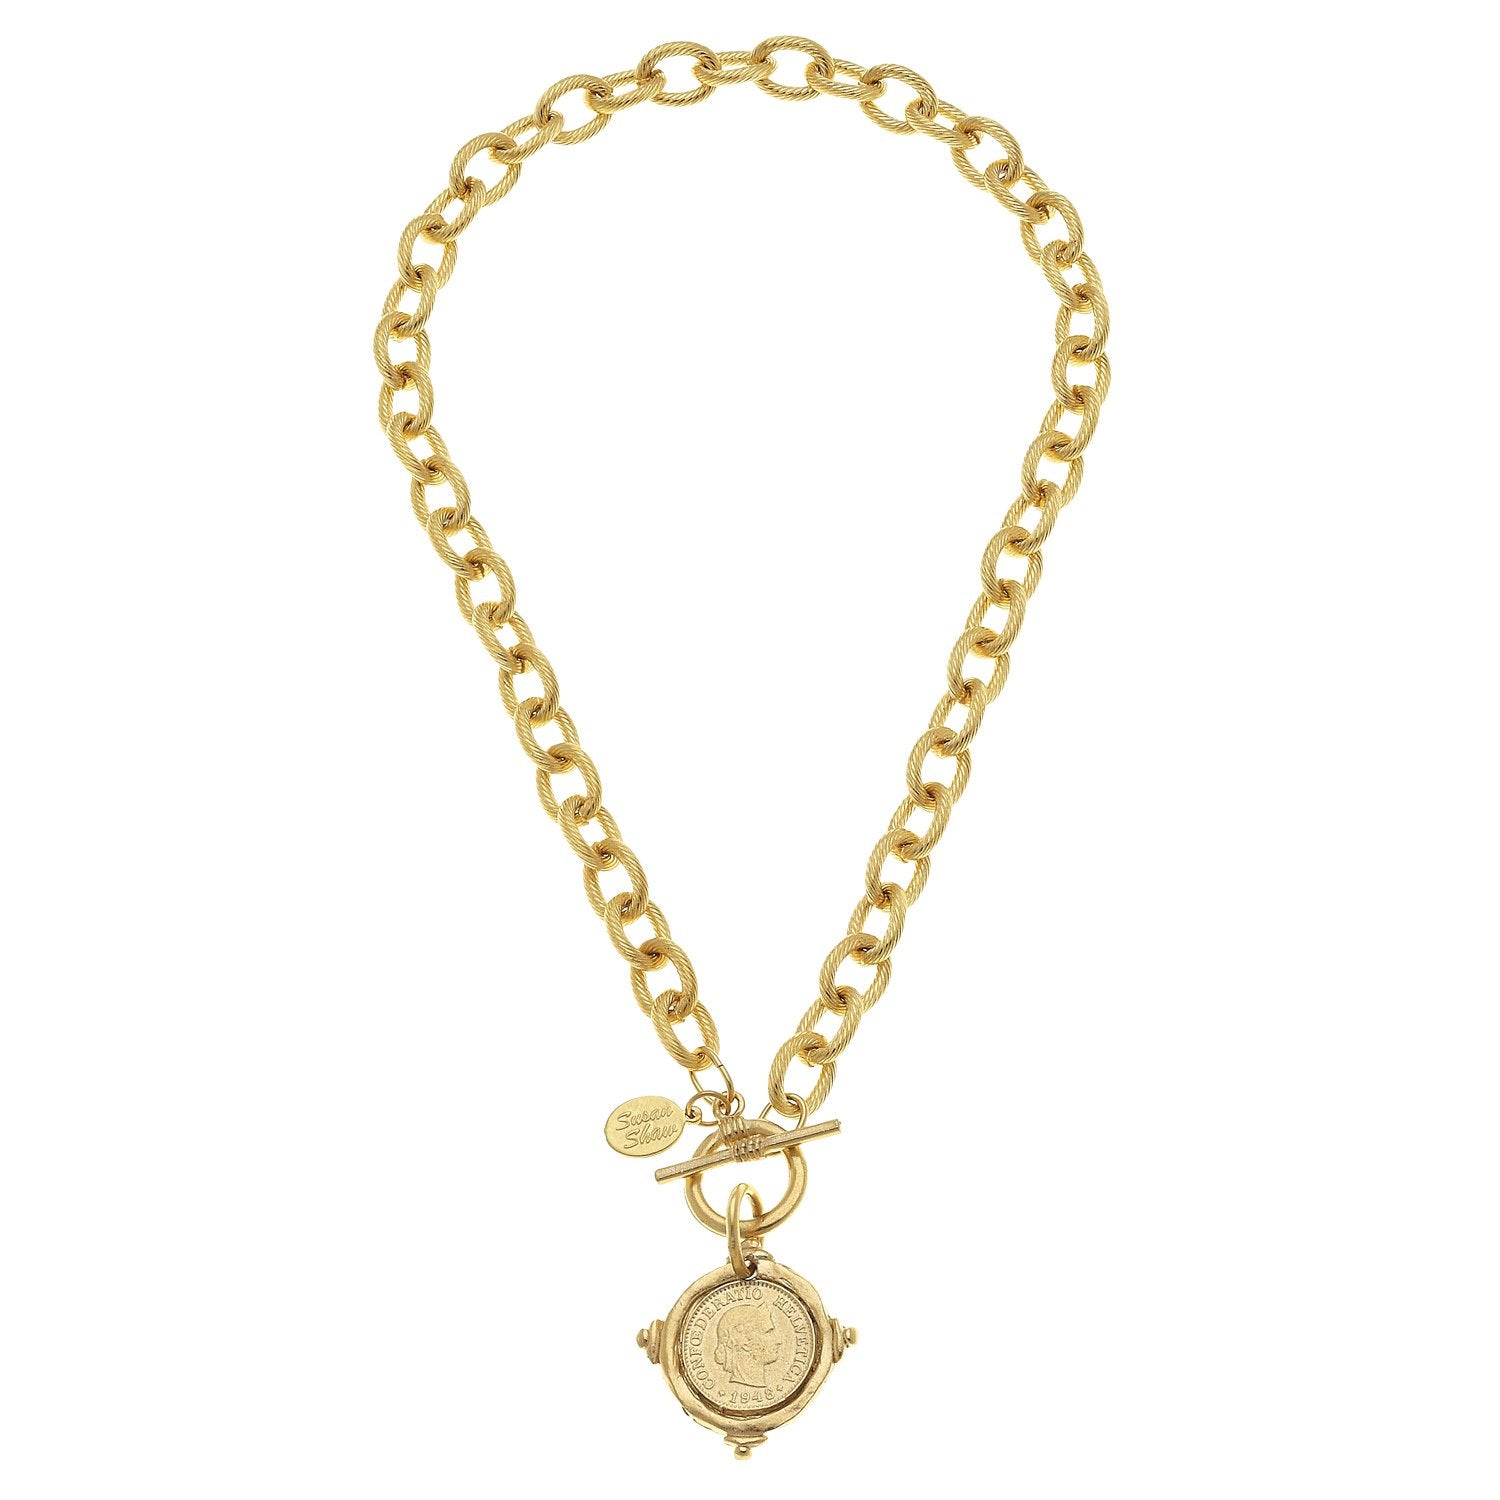 The Classic Toggle Necklace